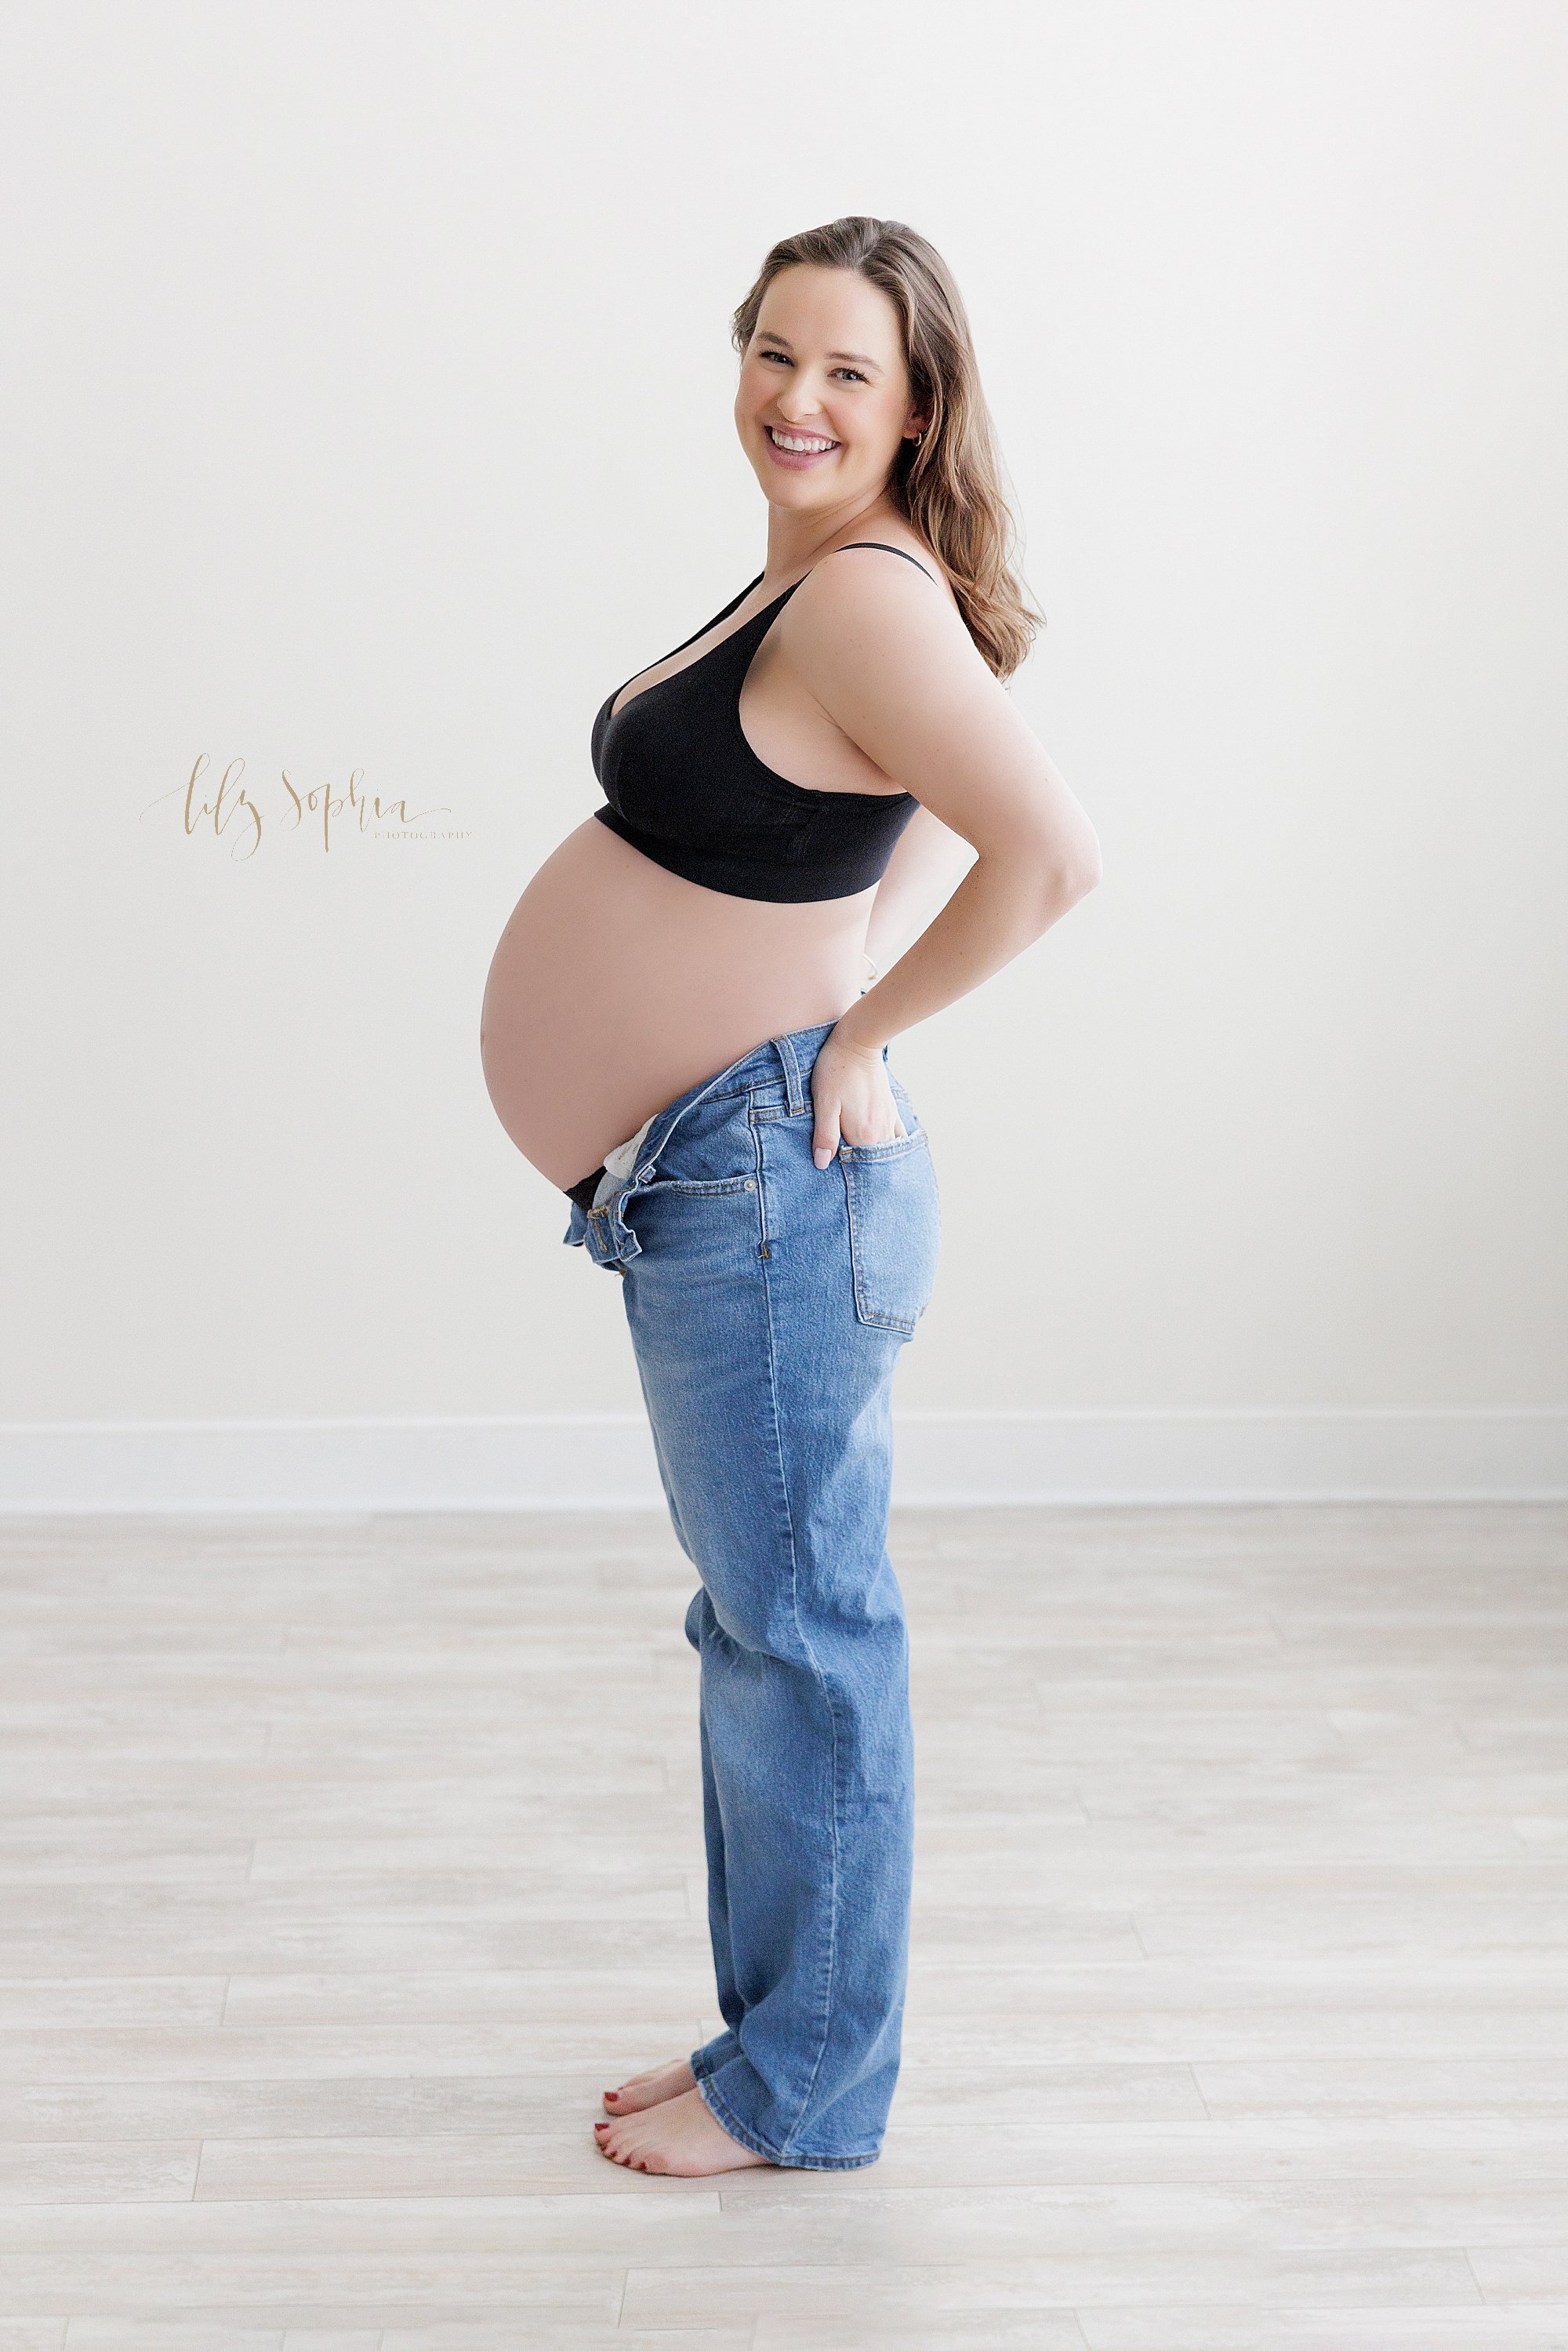  Maternity portrait of an expectant mother wearing a  black bra and a pair of blue jeans that are unbuttoned to show her bare belly as she looks over her left shoulder while putting her hands in the back pockets of her jeans as she stands in a natura